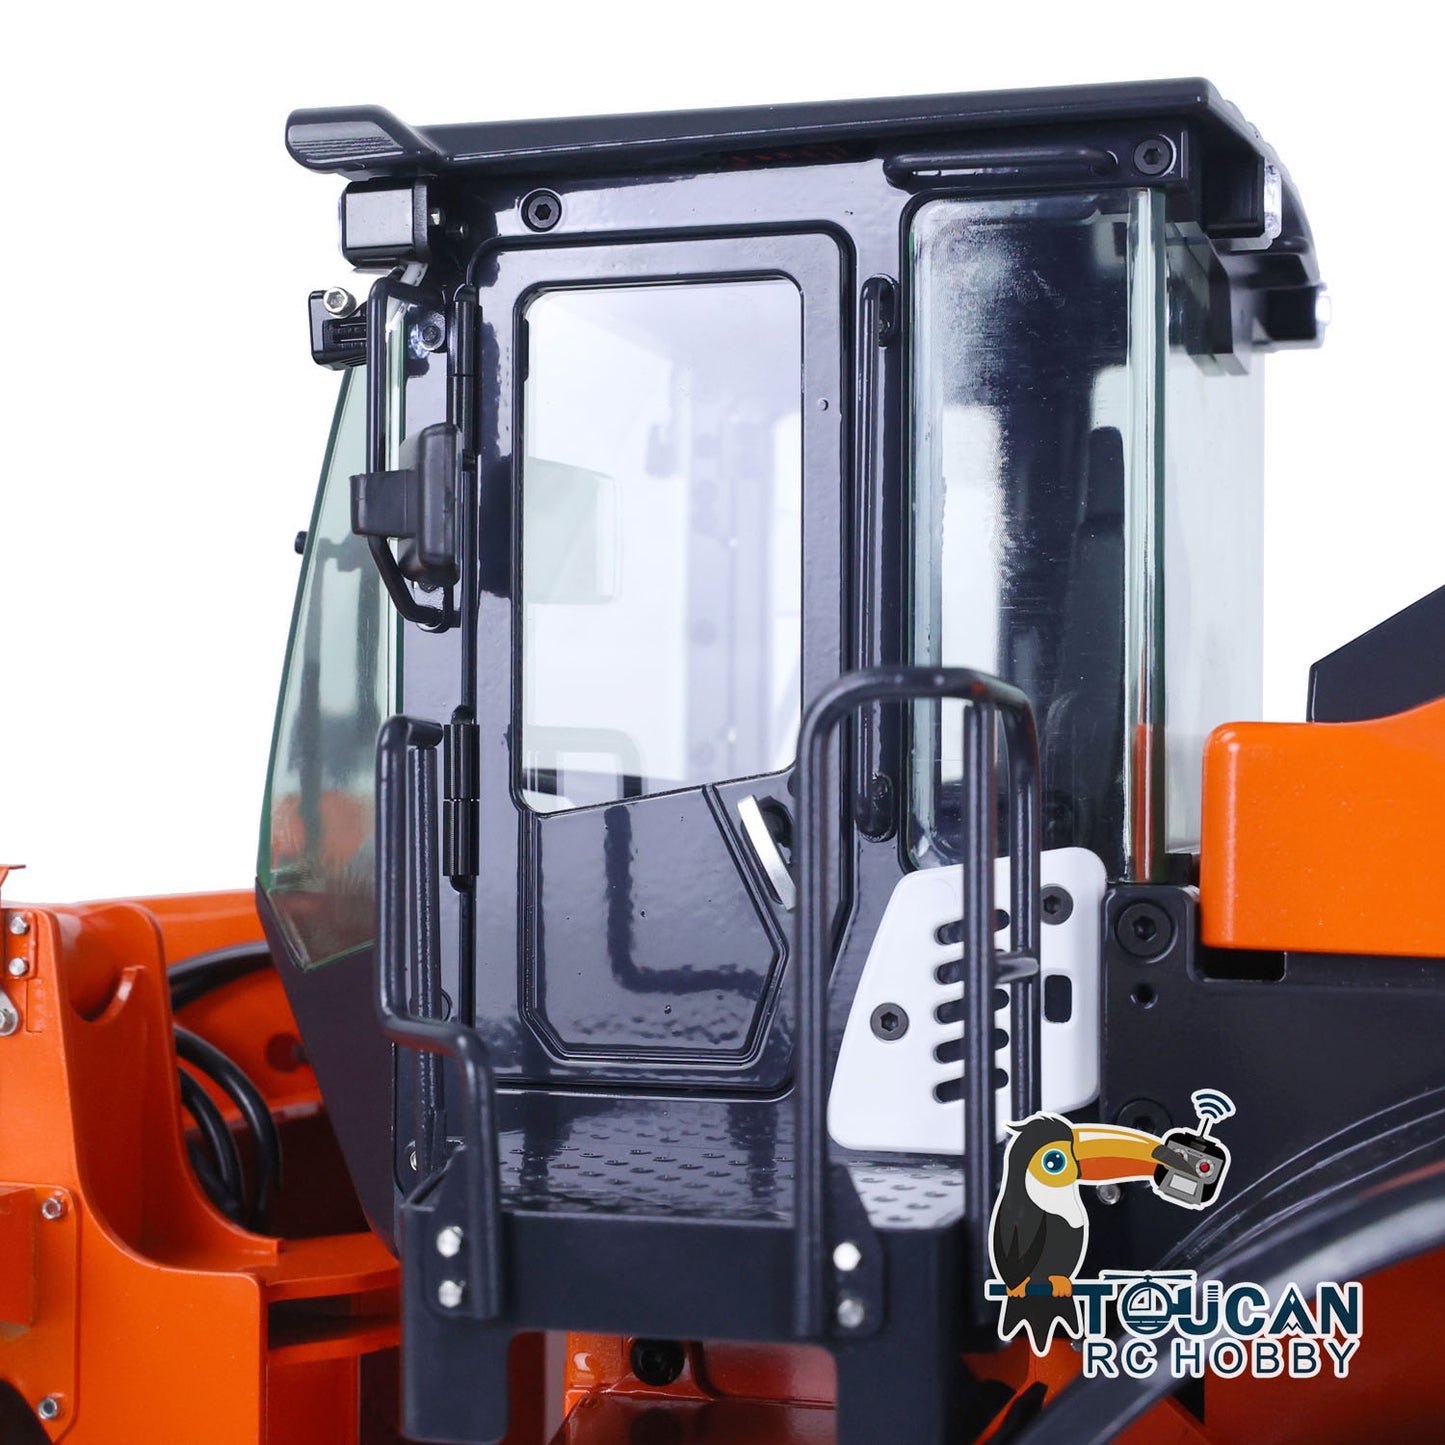 JDMODEL Metal Hydraulic Loader JDM-198 1/14 RC RTR Construction Vehicles ZW370 Car Models 2-Speed Transmission Battery